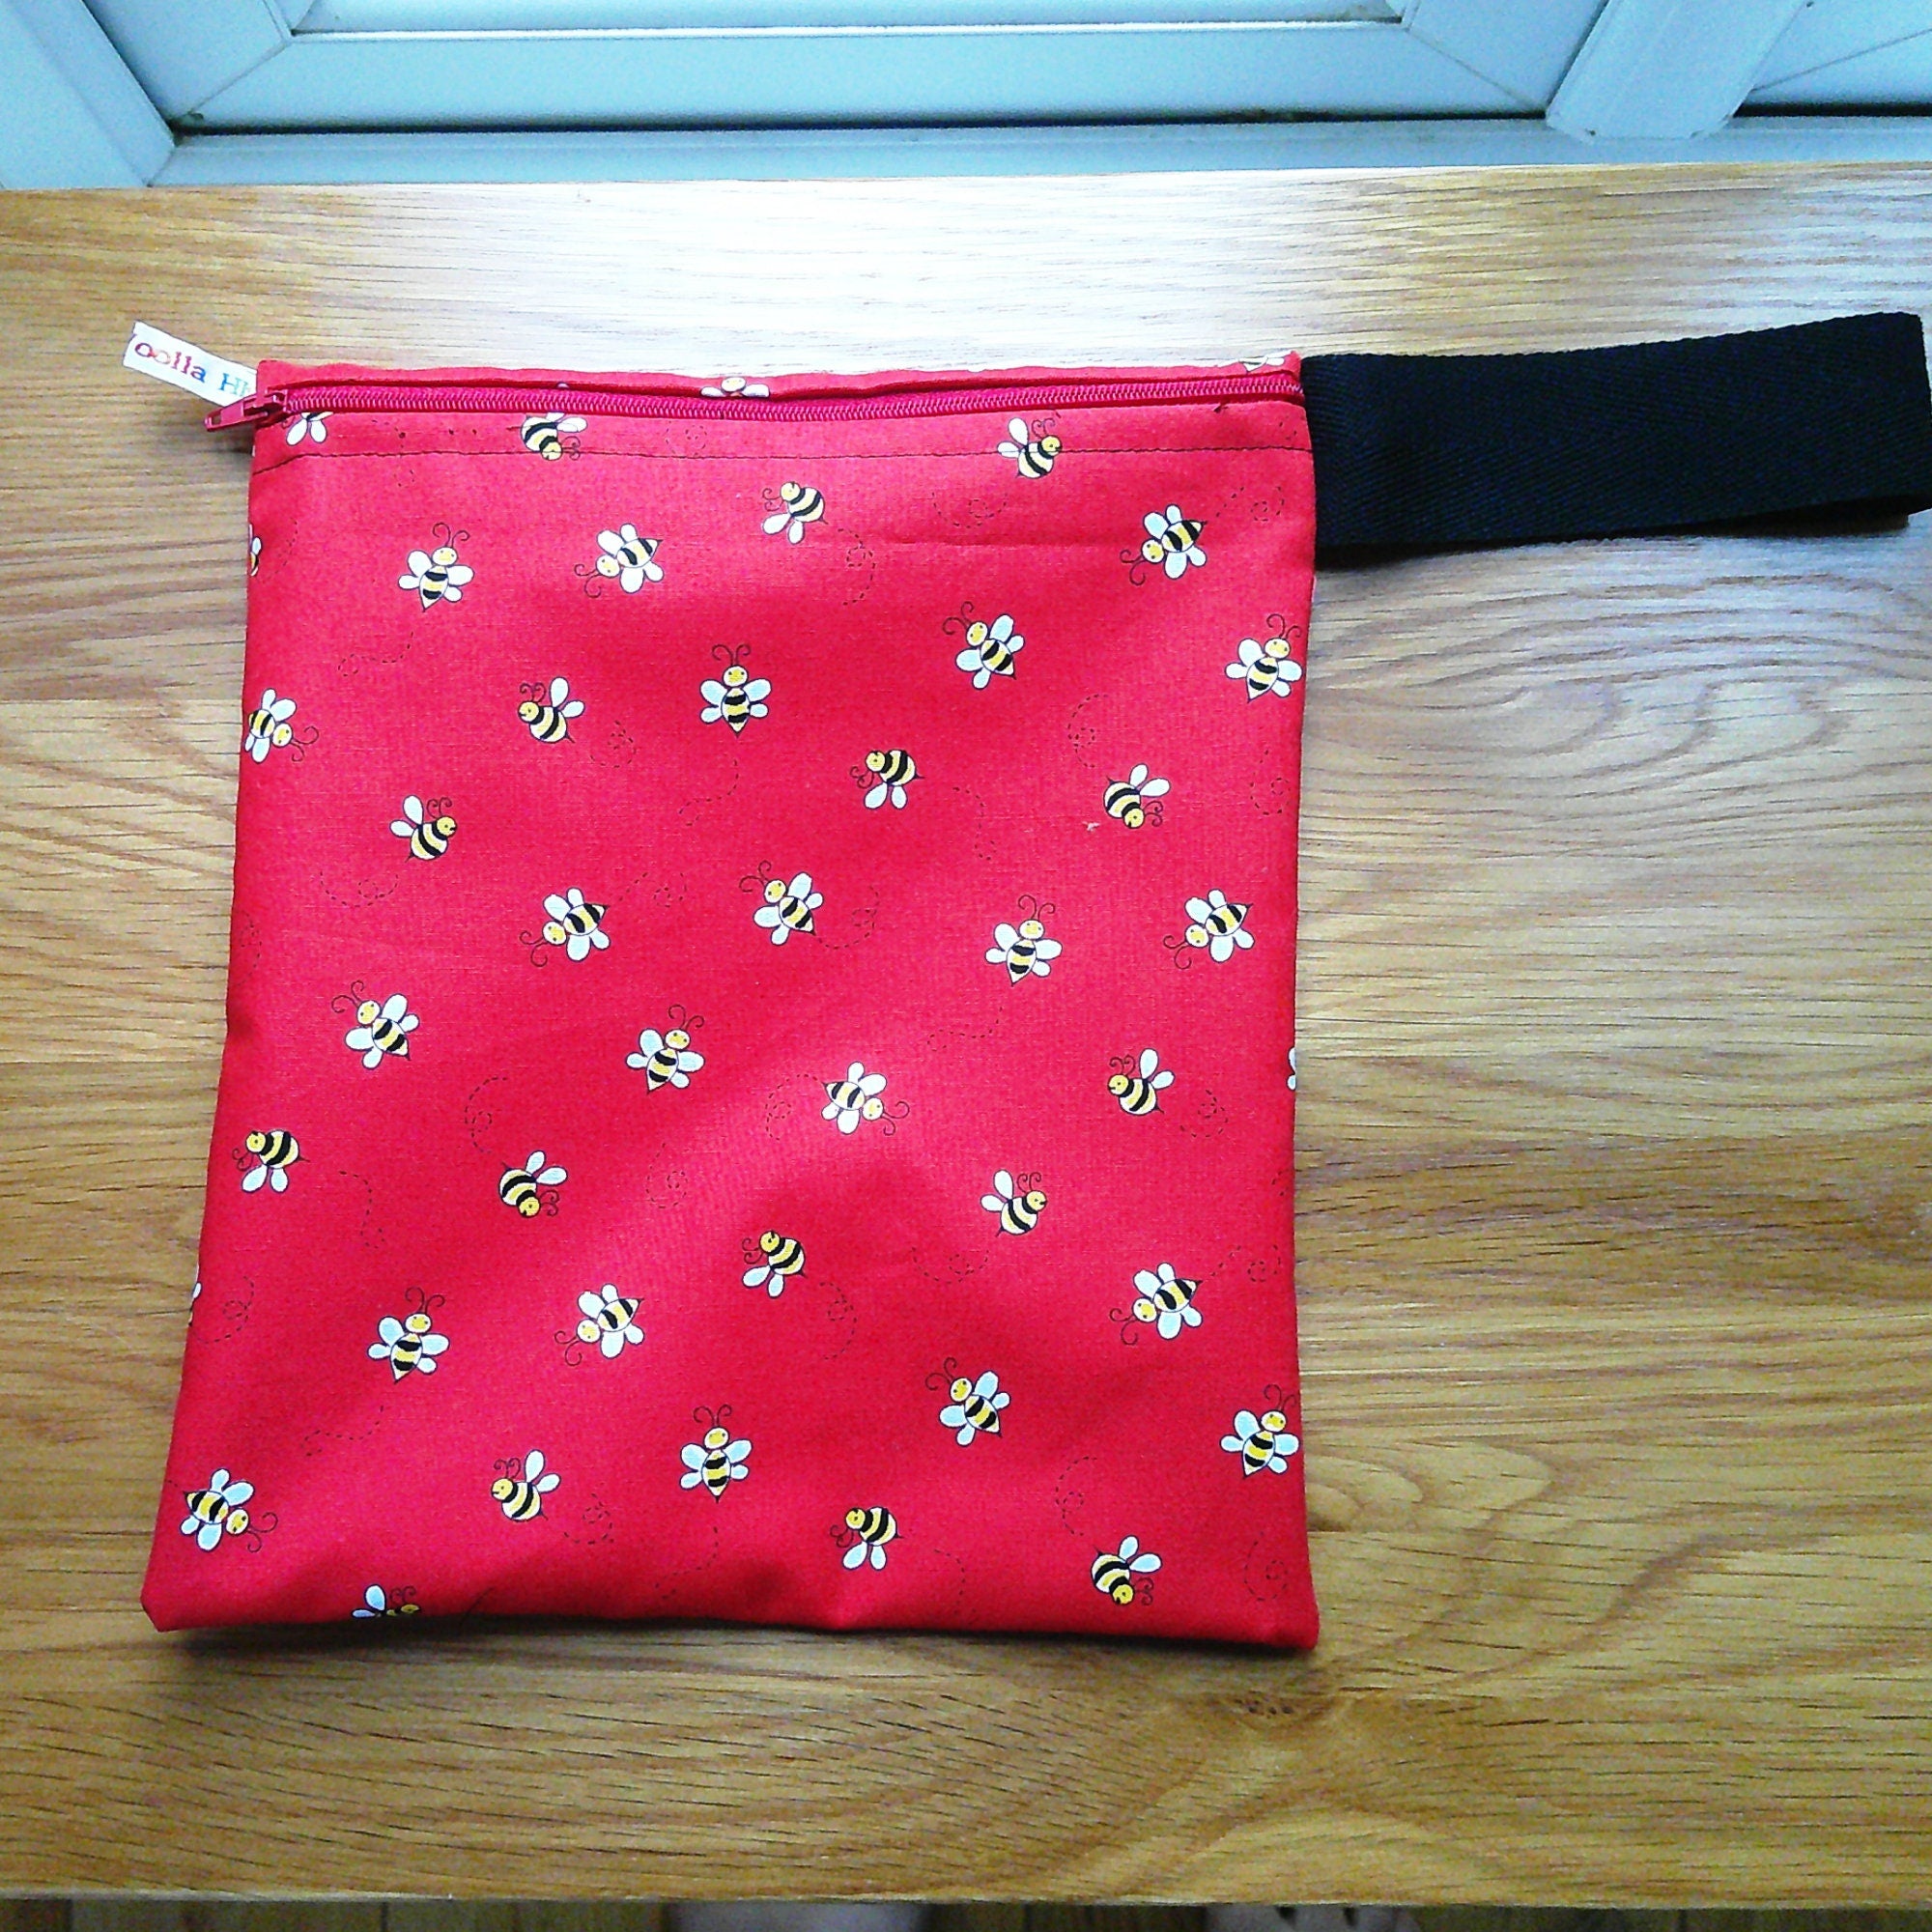 Washable Lunch Bag, Travel Toiletry Bag, School Lunch Box, Reusable Lunch Bag, Travel Makeup Bag, Reusable Wipe, Gym Bag - Red Bee